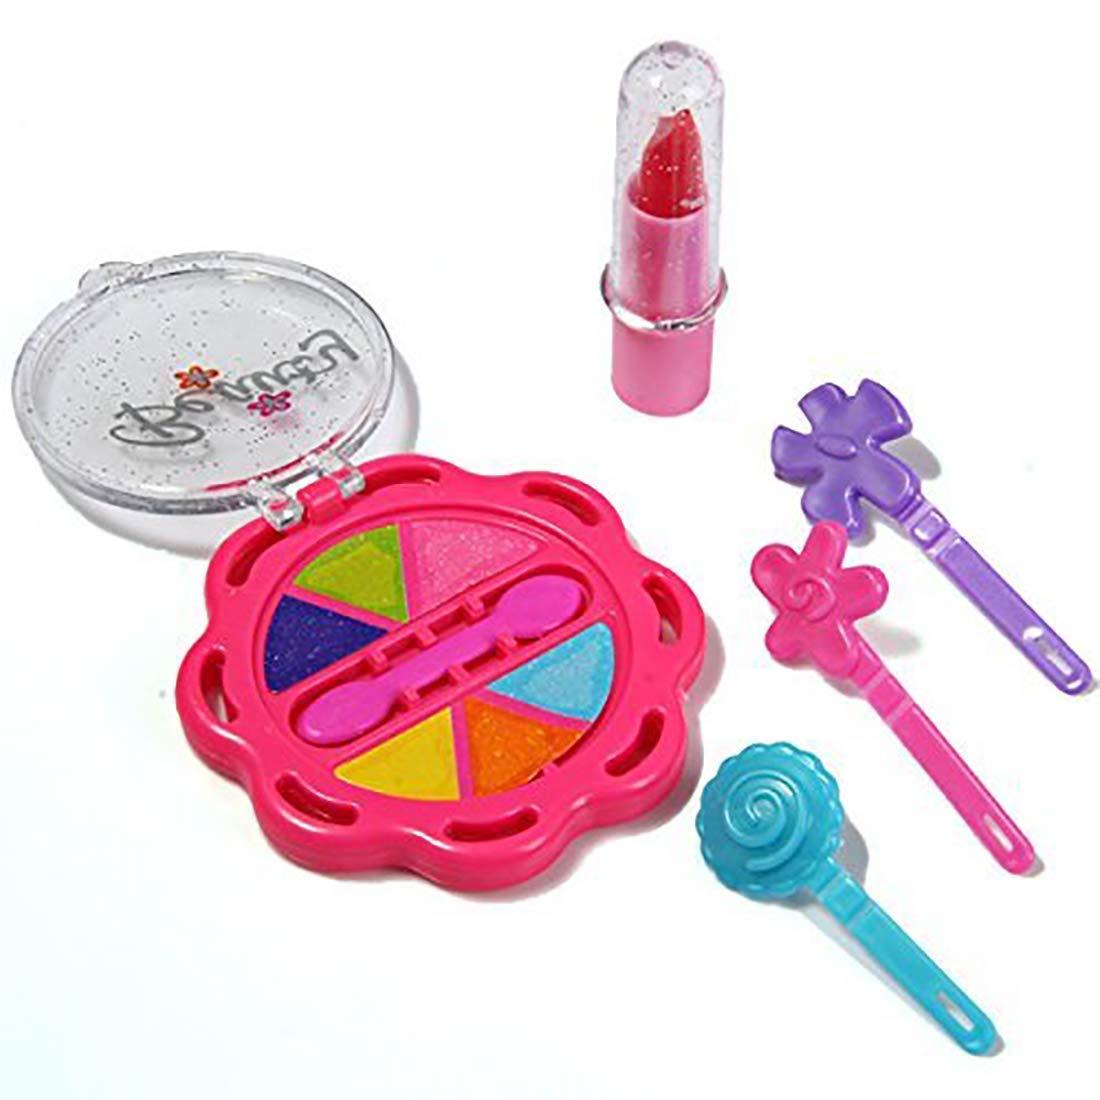 1908 Beauty Make up Set for Kids Girls with Fold-able Suitcase (Multicolour) - SkyShopy